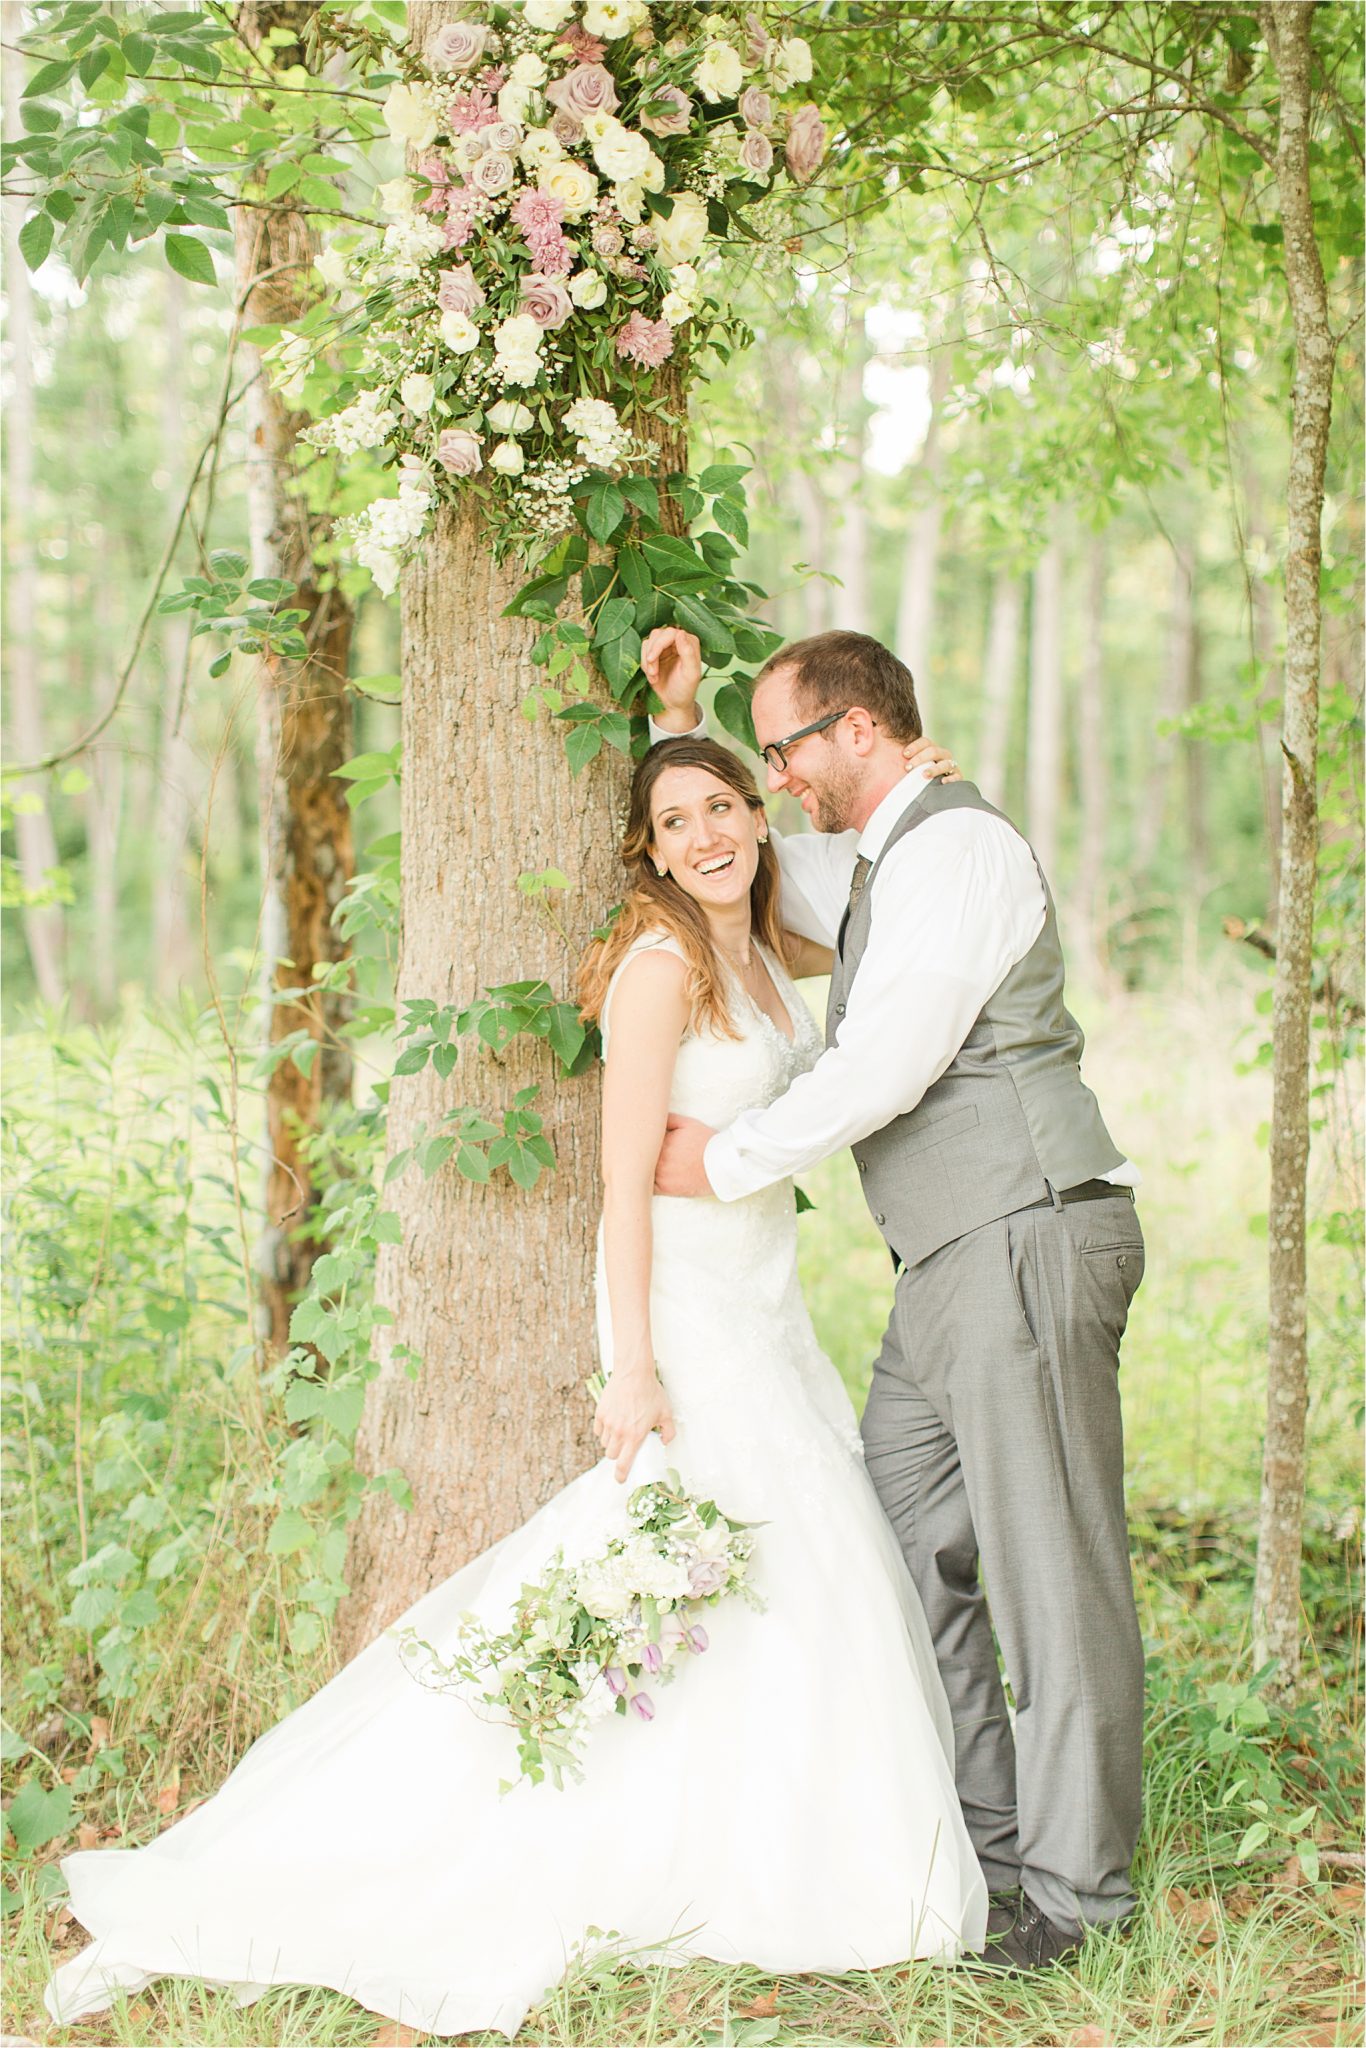 backyard country wedding-decorate trees with wedding flowers-bride and groom portraits-wedding day-grey grooms suit-vest-lavender flowers-candid laughter